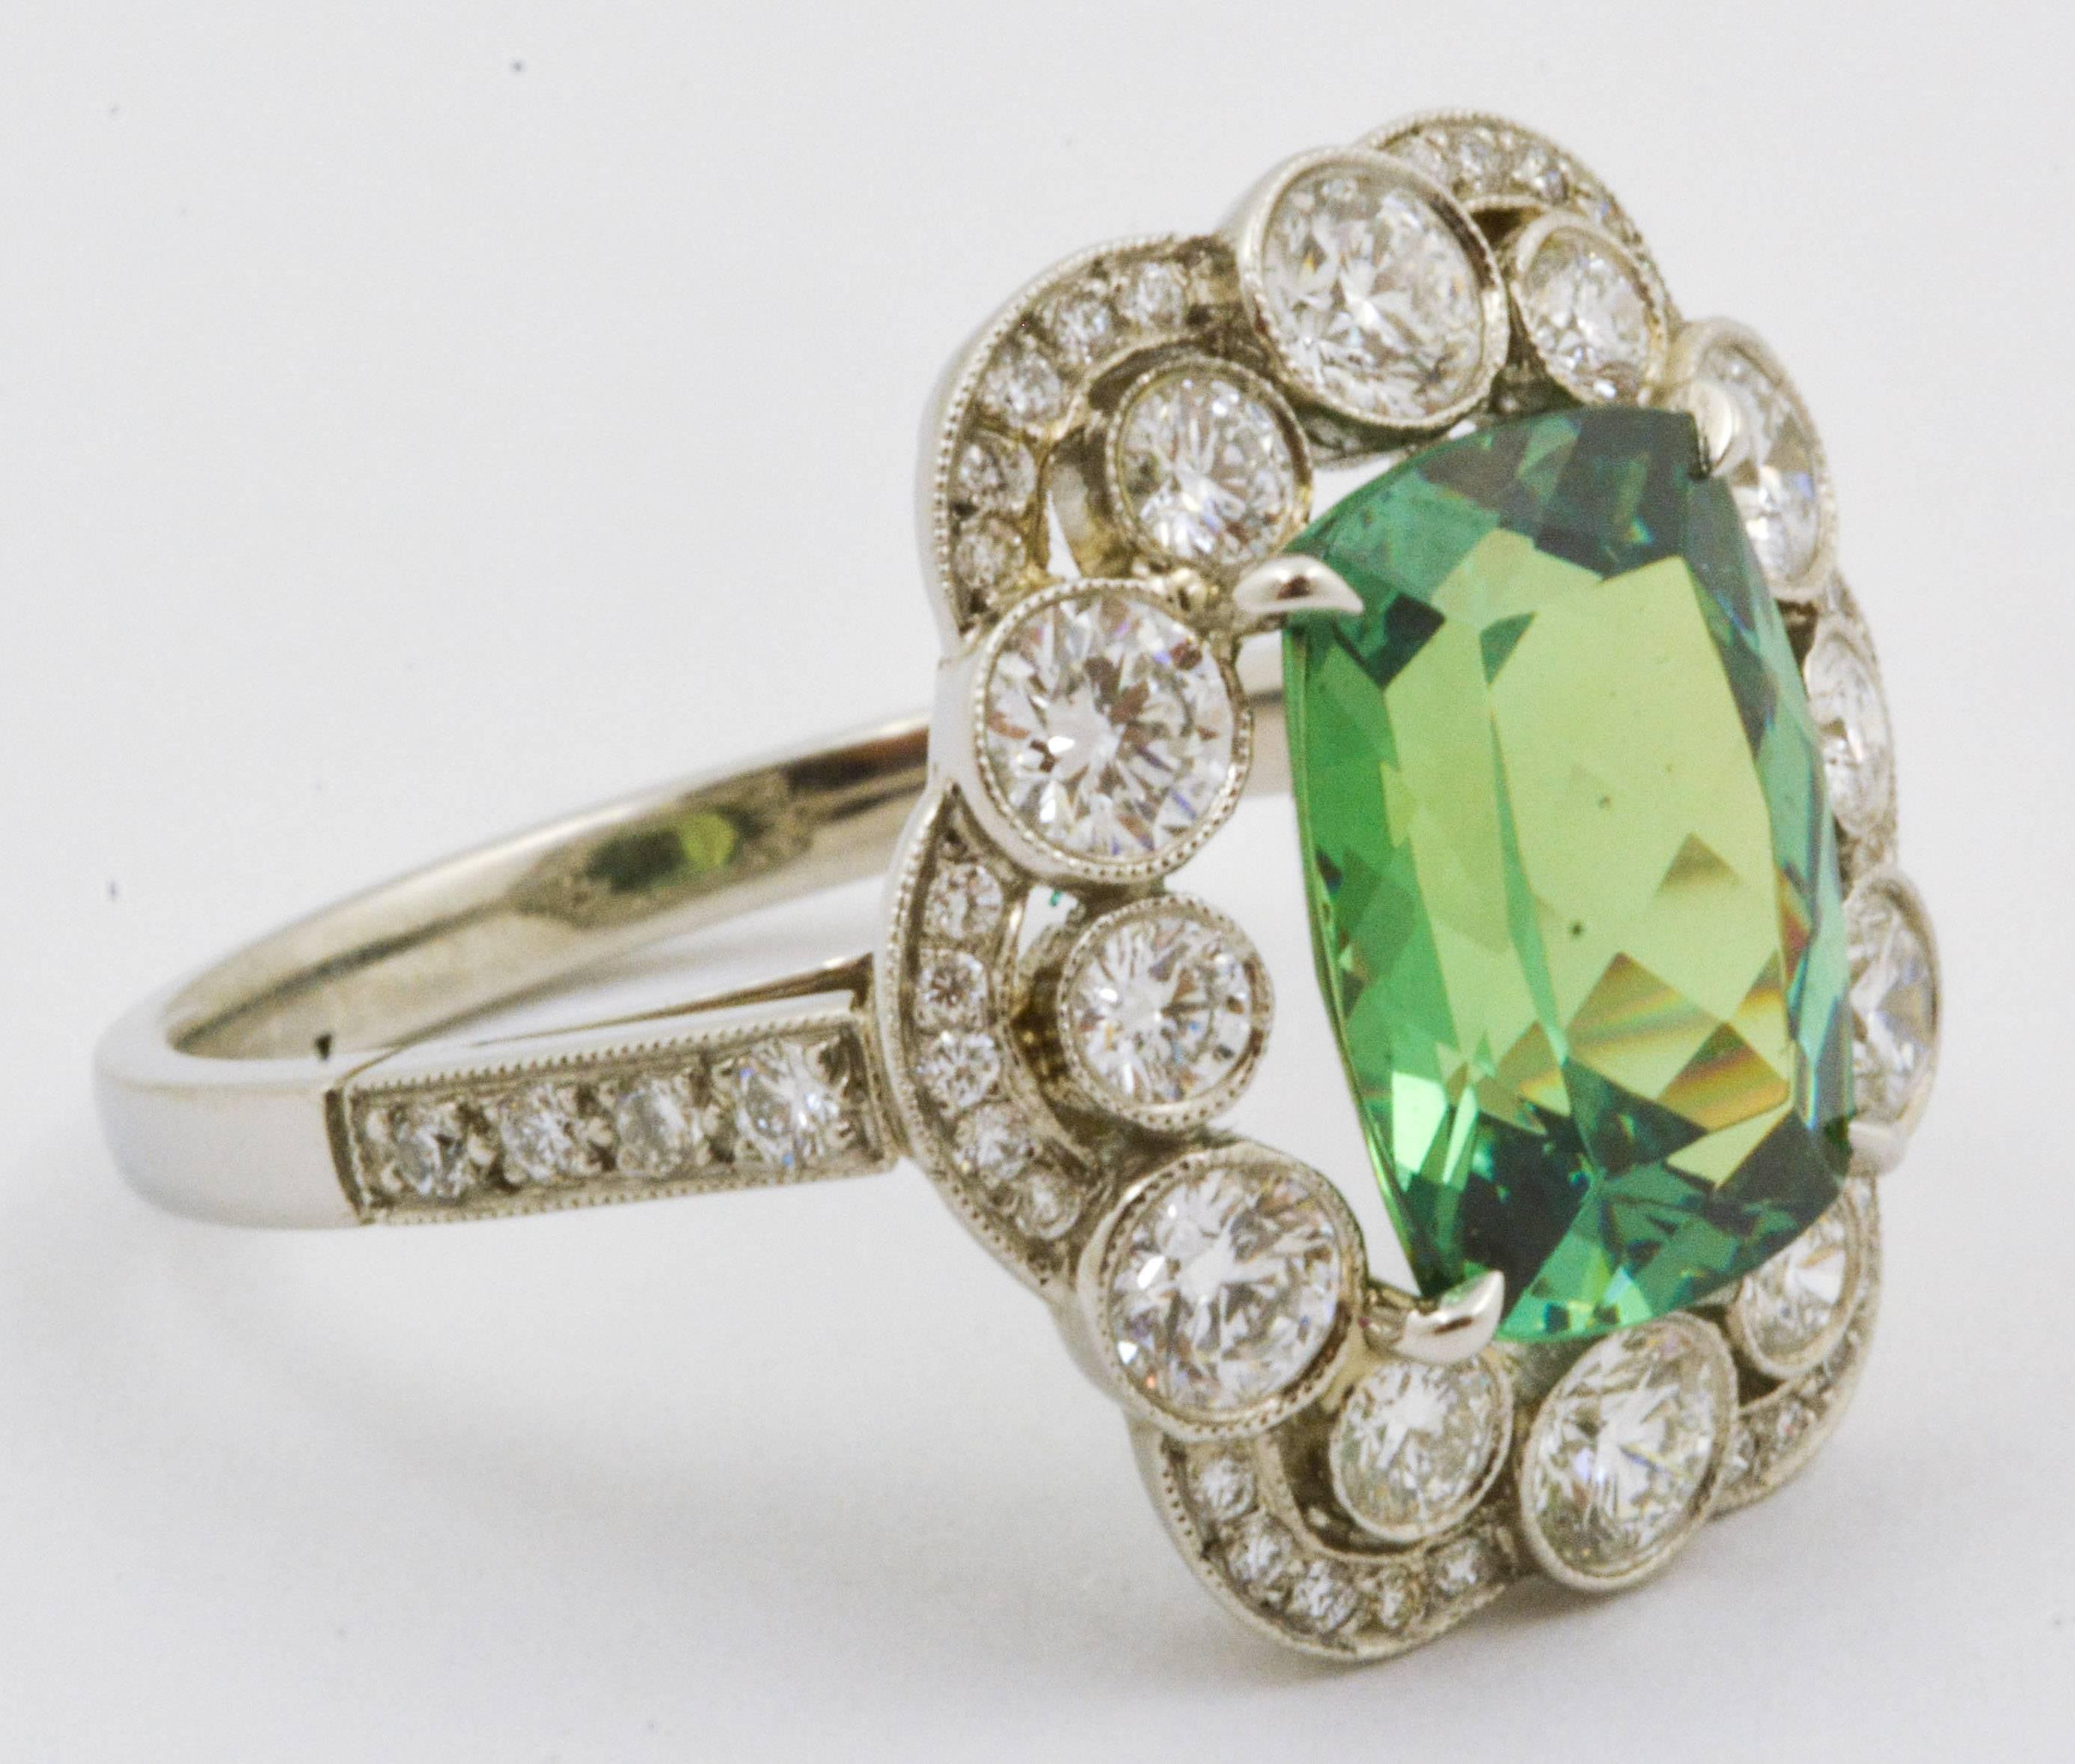 This matchless Tsavorite ring is a singular piece of jewelry whose bright 3.92 carat Tsavorite garnet will catch any eye. Delicately designed with platinum and 1.21 carats of bezel set diamonds (internal clarity VS color G-H) as a halo about the